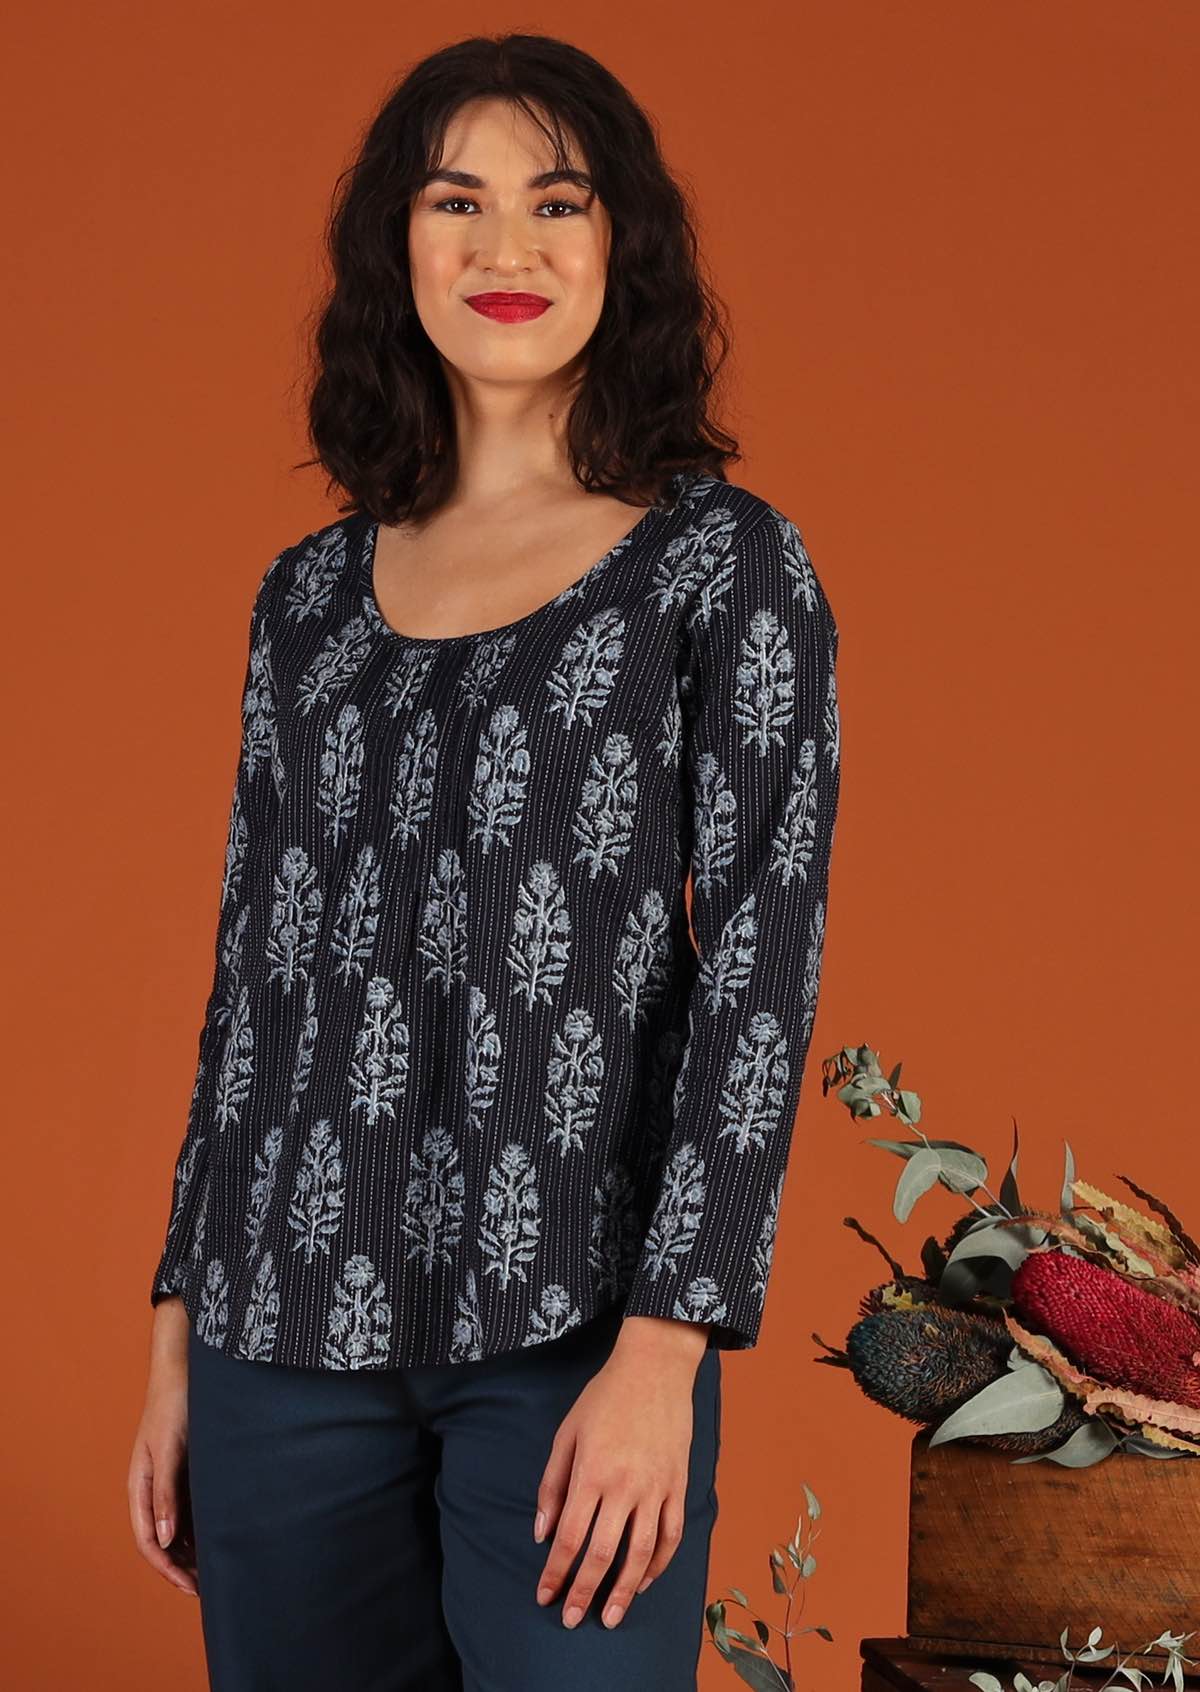  Model in blouse with floral motif and scoop neck worn over blue cotton pants